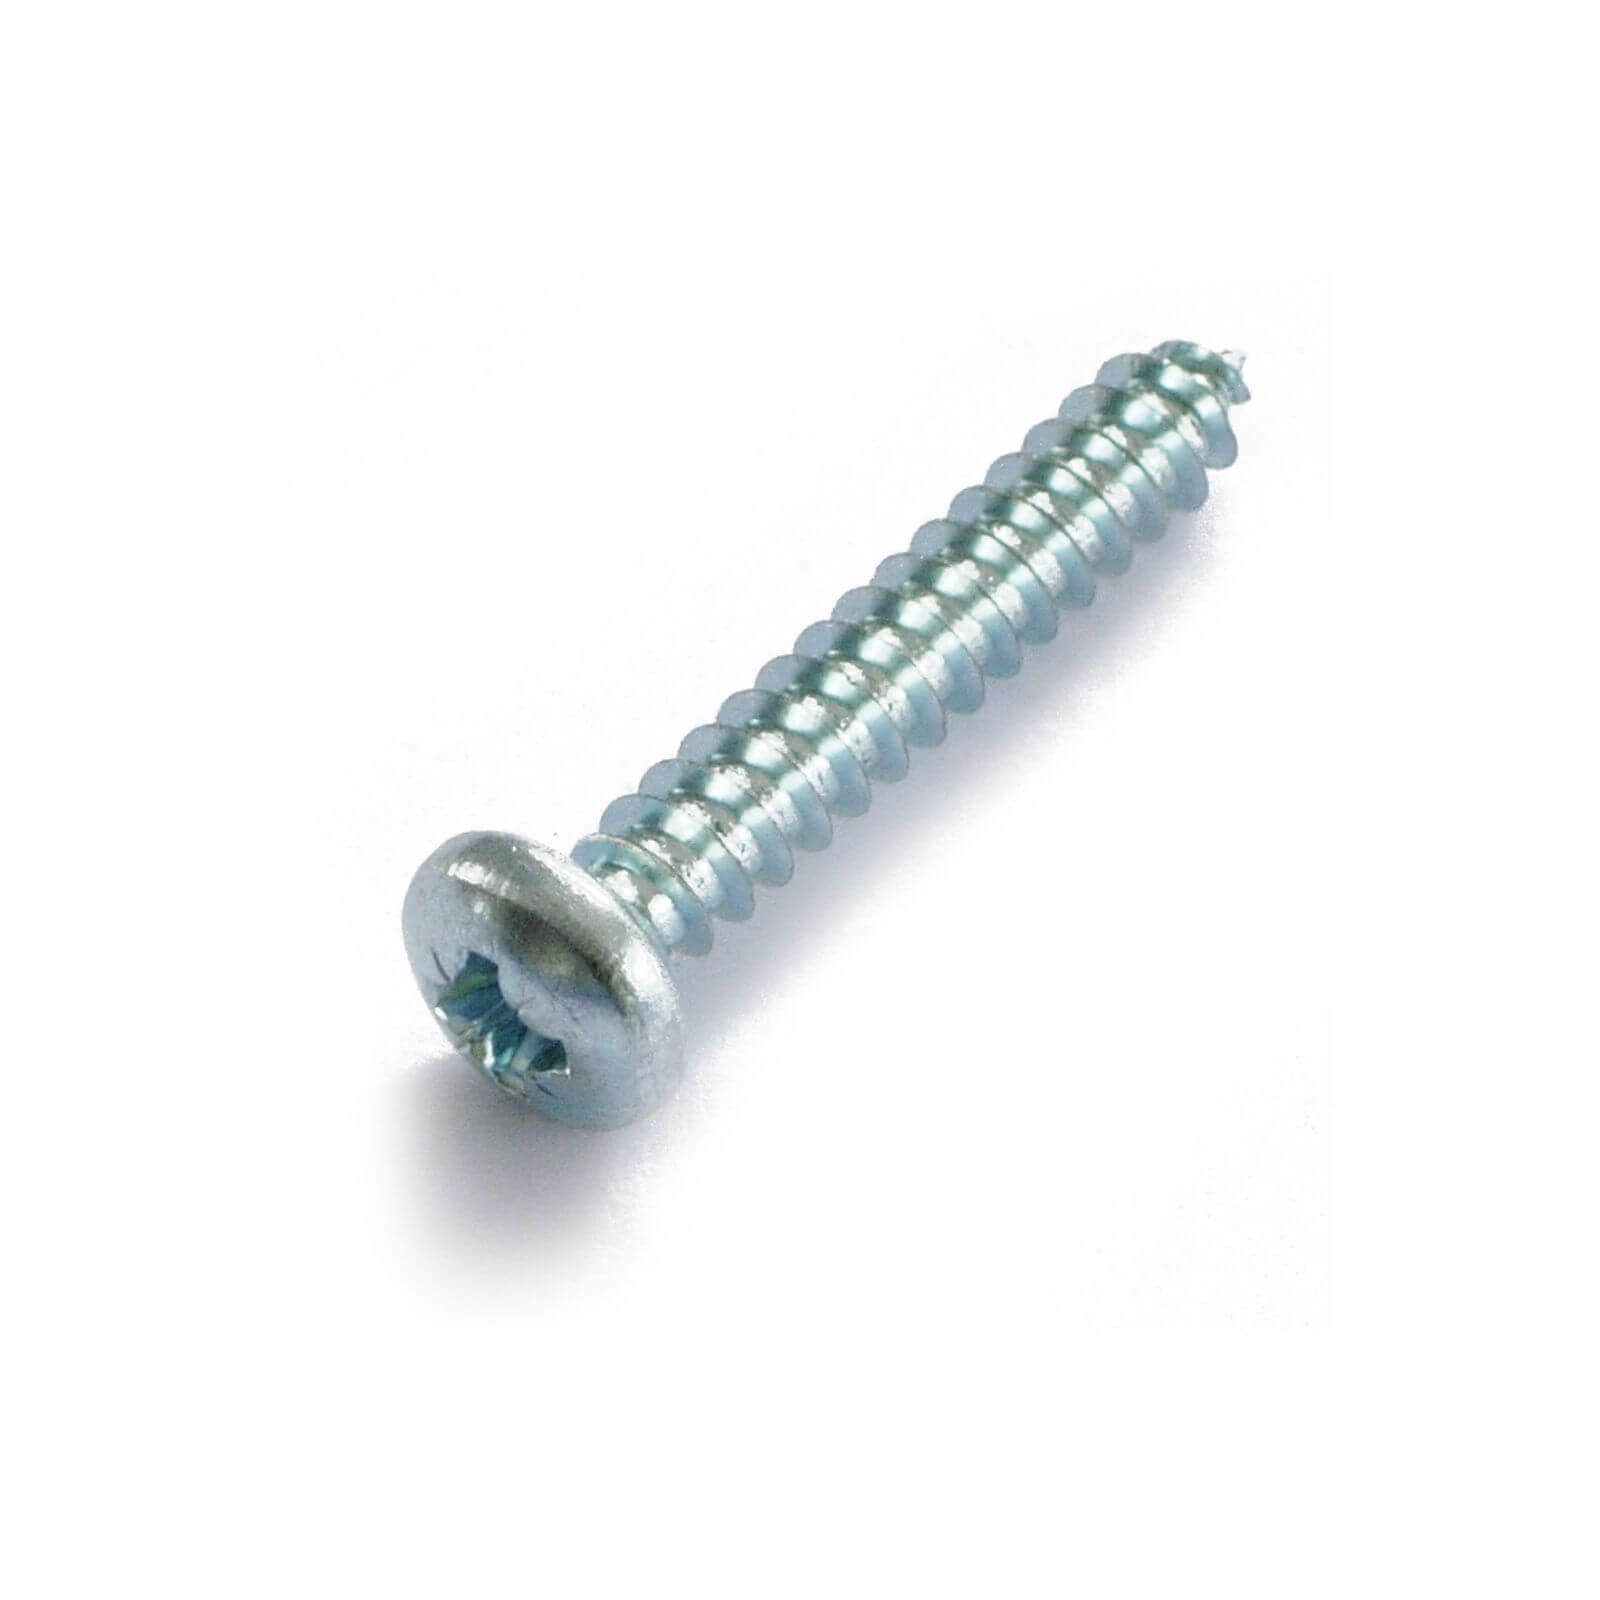 Self Tapping Screw - Bright Zinc Plated - 5 x 16mm - 10 Pack